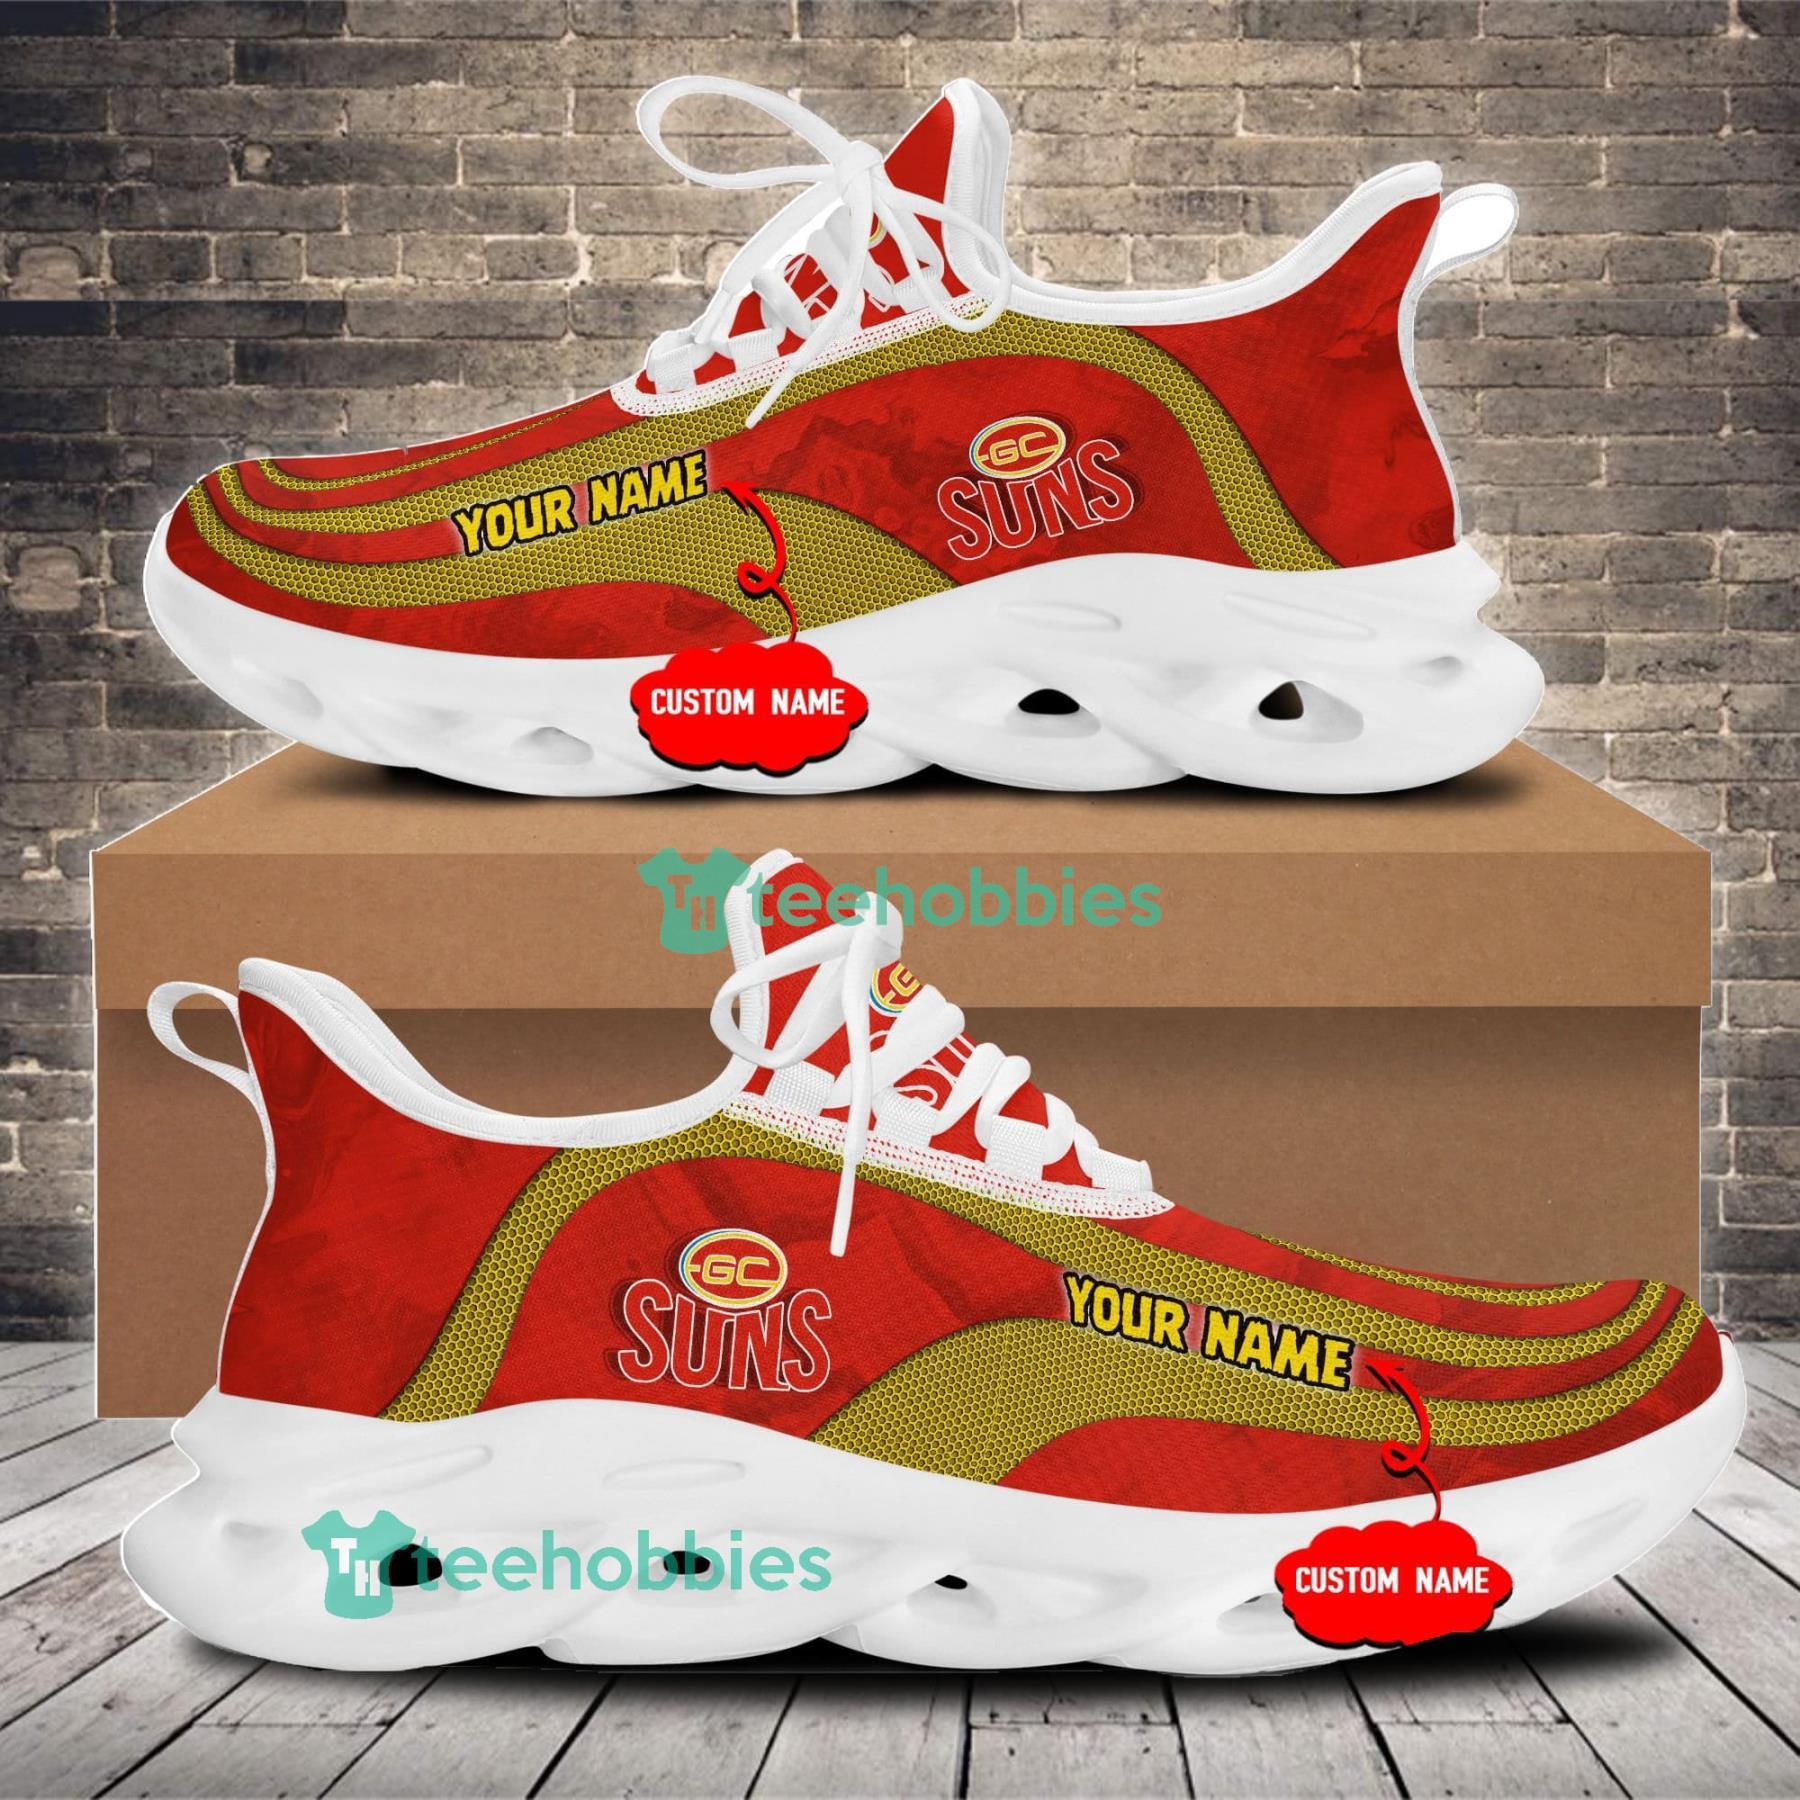 Gold Coast Custom Name Football Club Sneakers Max Soul Shoes For Men And Women Product Photo 1